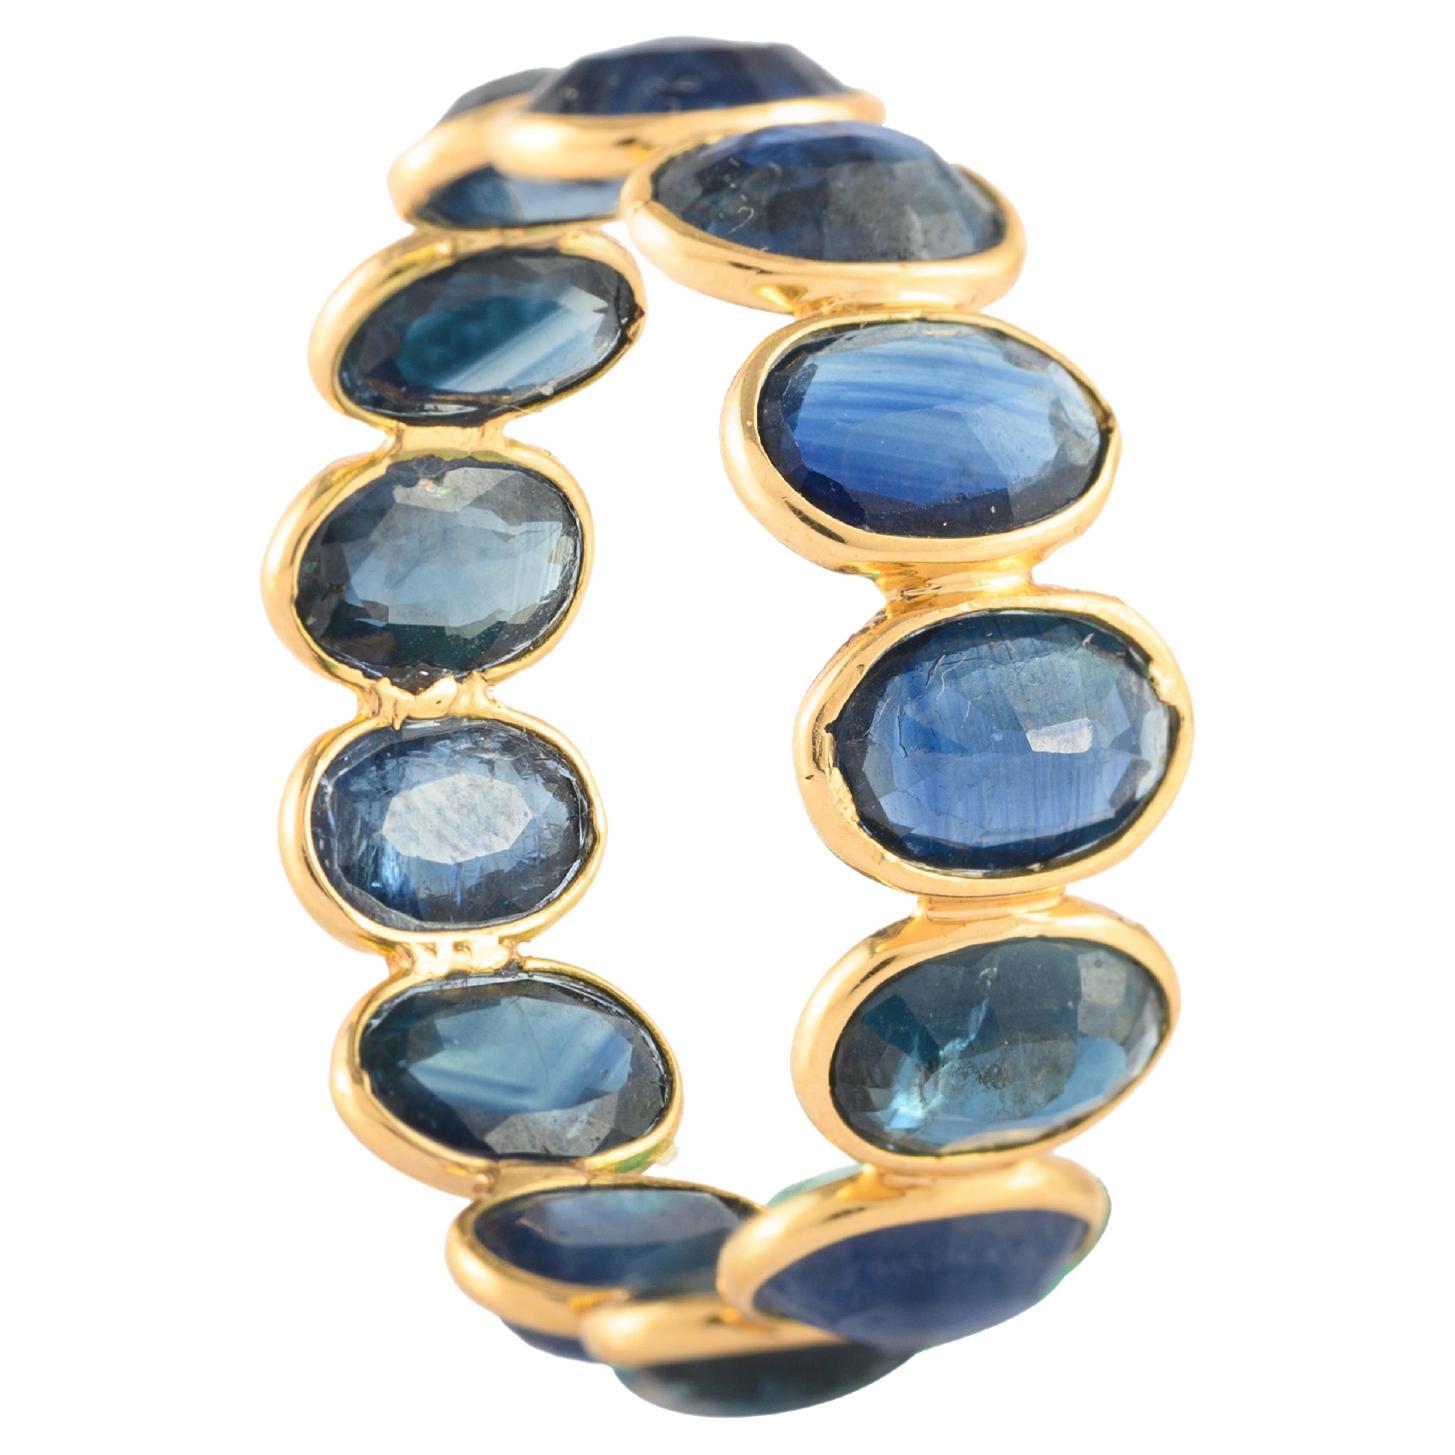 For Sale:  7.8 Carat Continual Oval Blue Sapphire Eternity Band Ring in 18k Yellow Gold